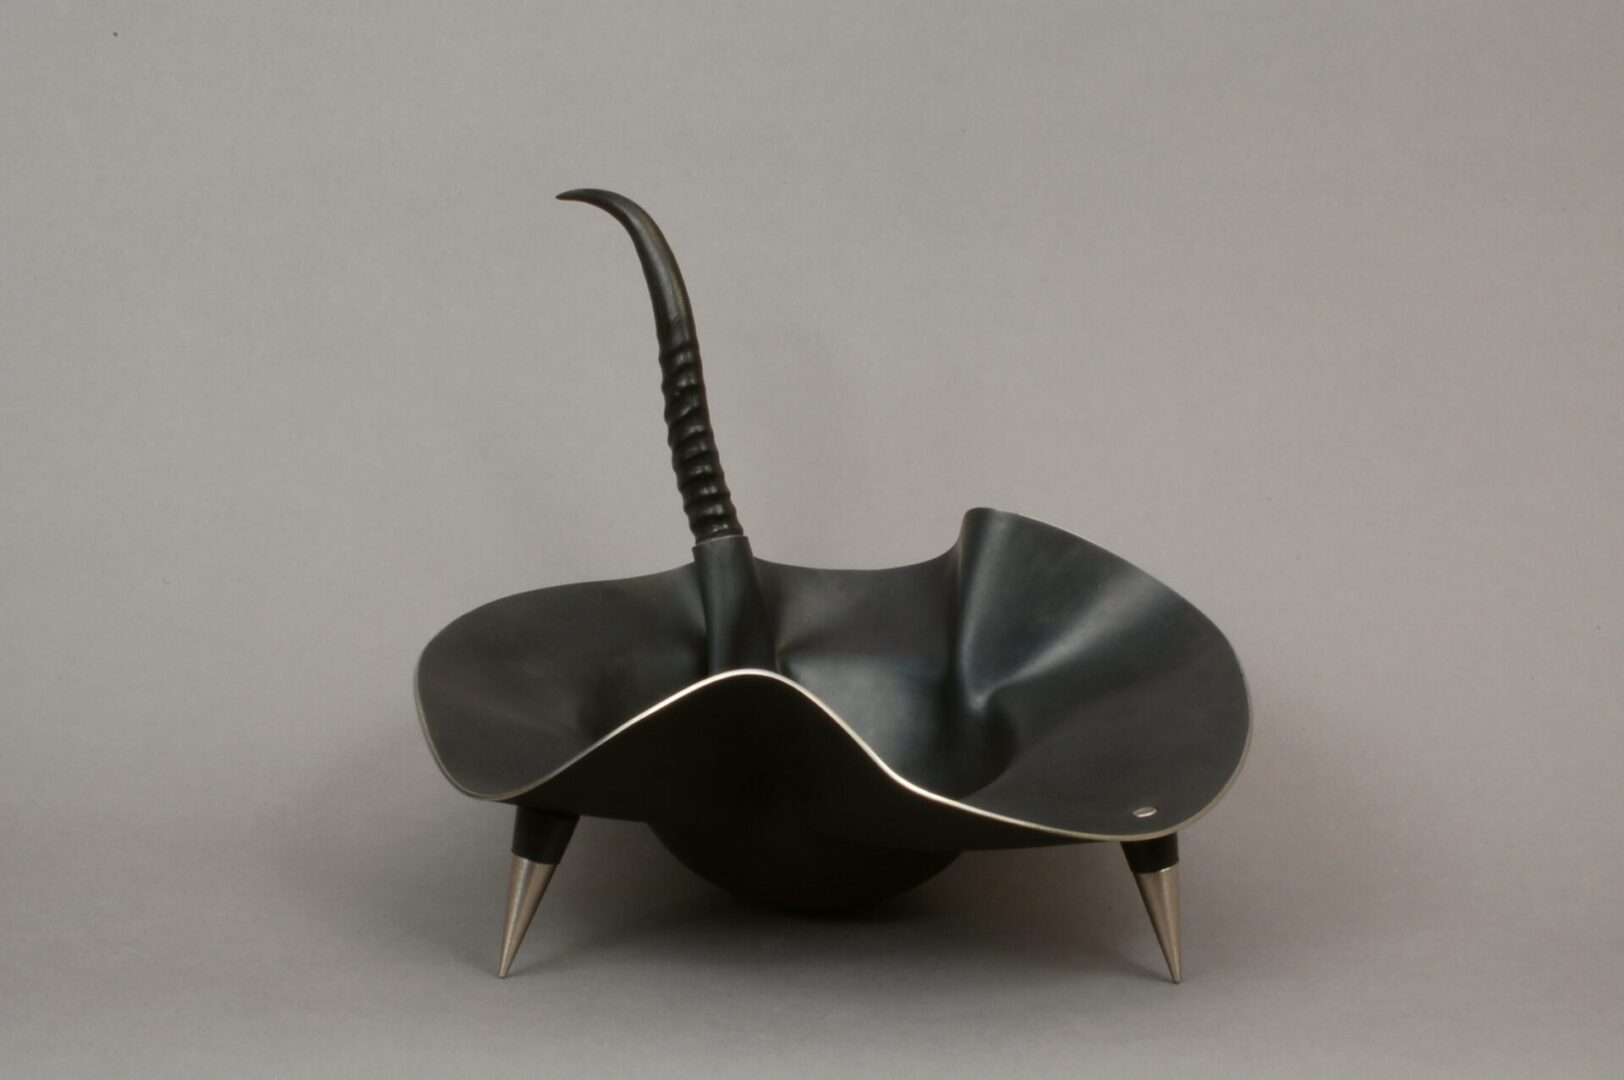 A black bowl with metal legs on a gray background, perfect for displaying Ira Sherman Jewelry.